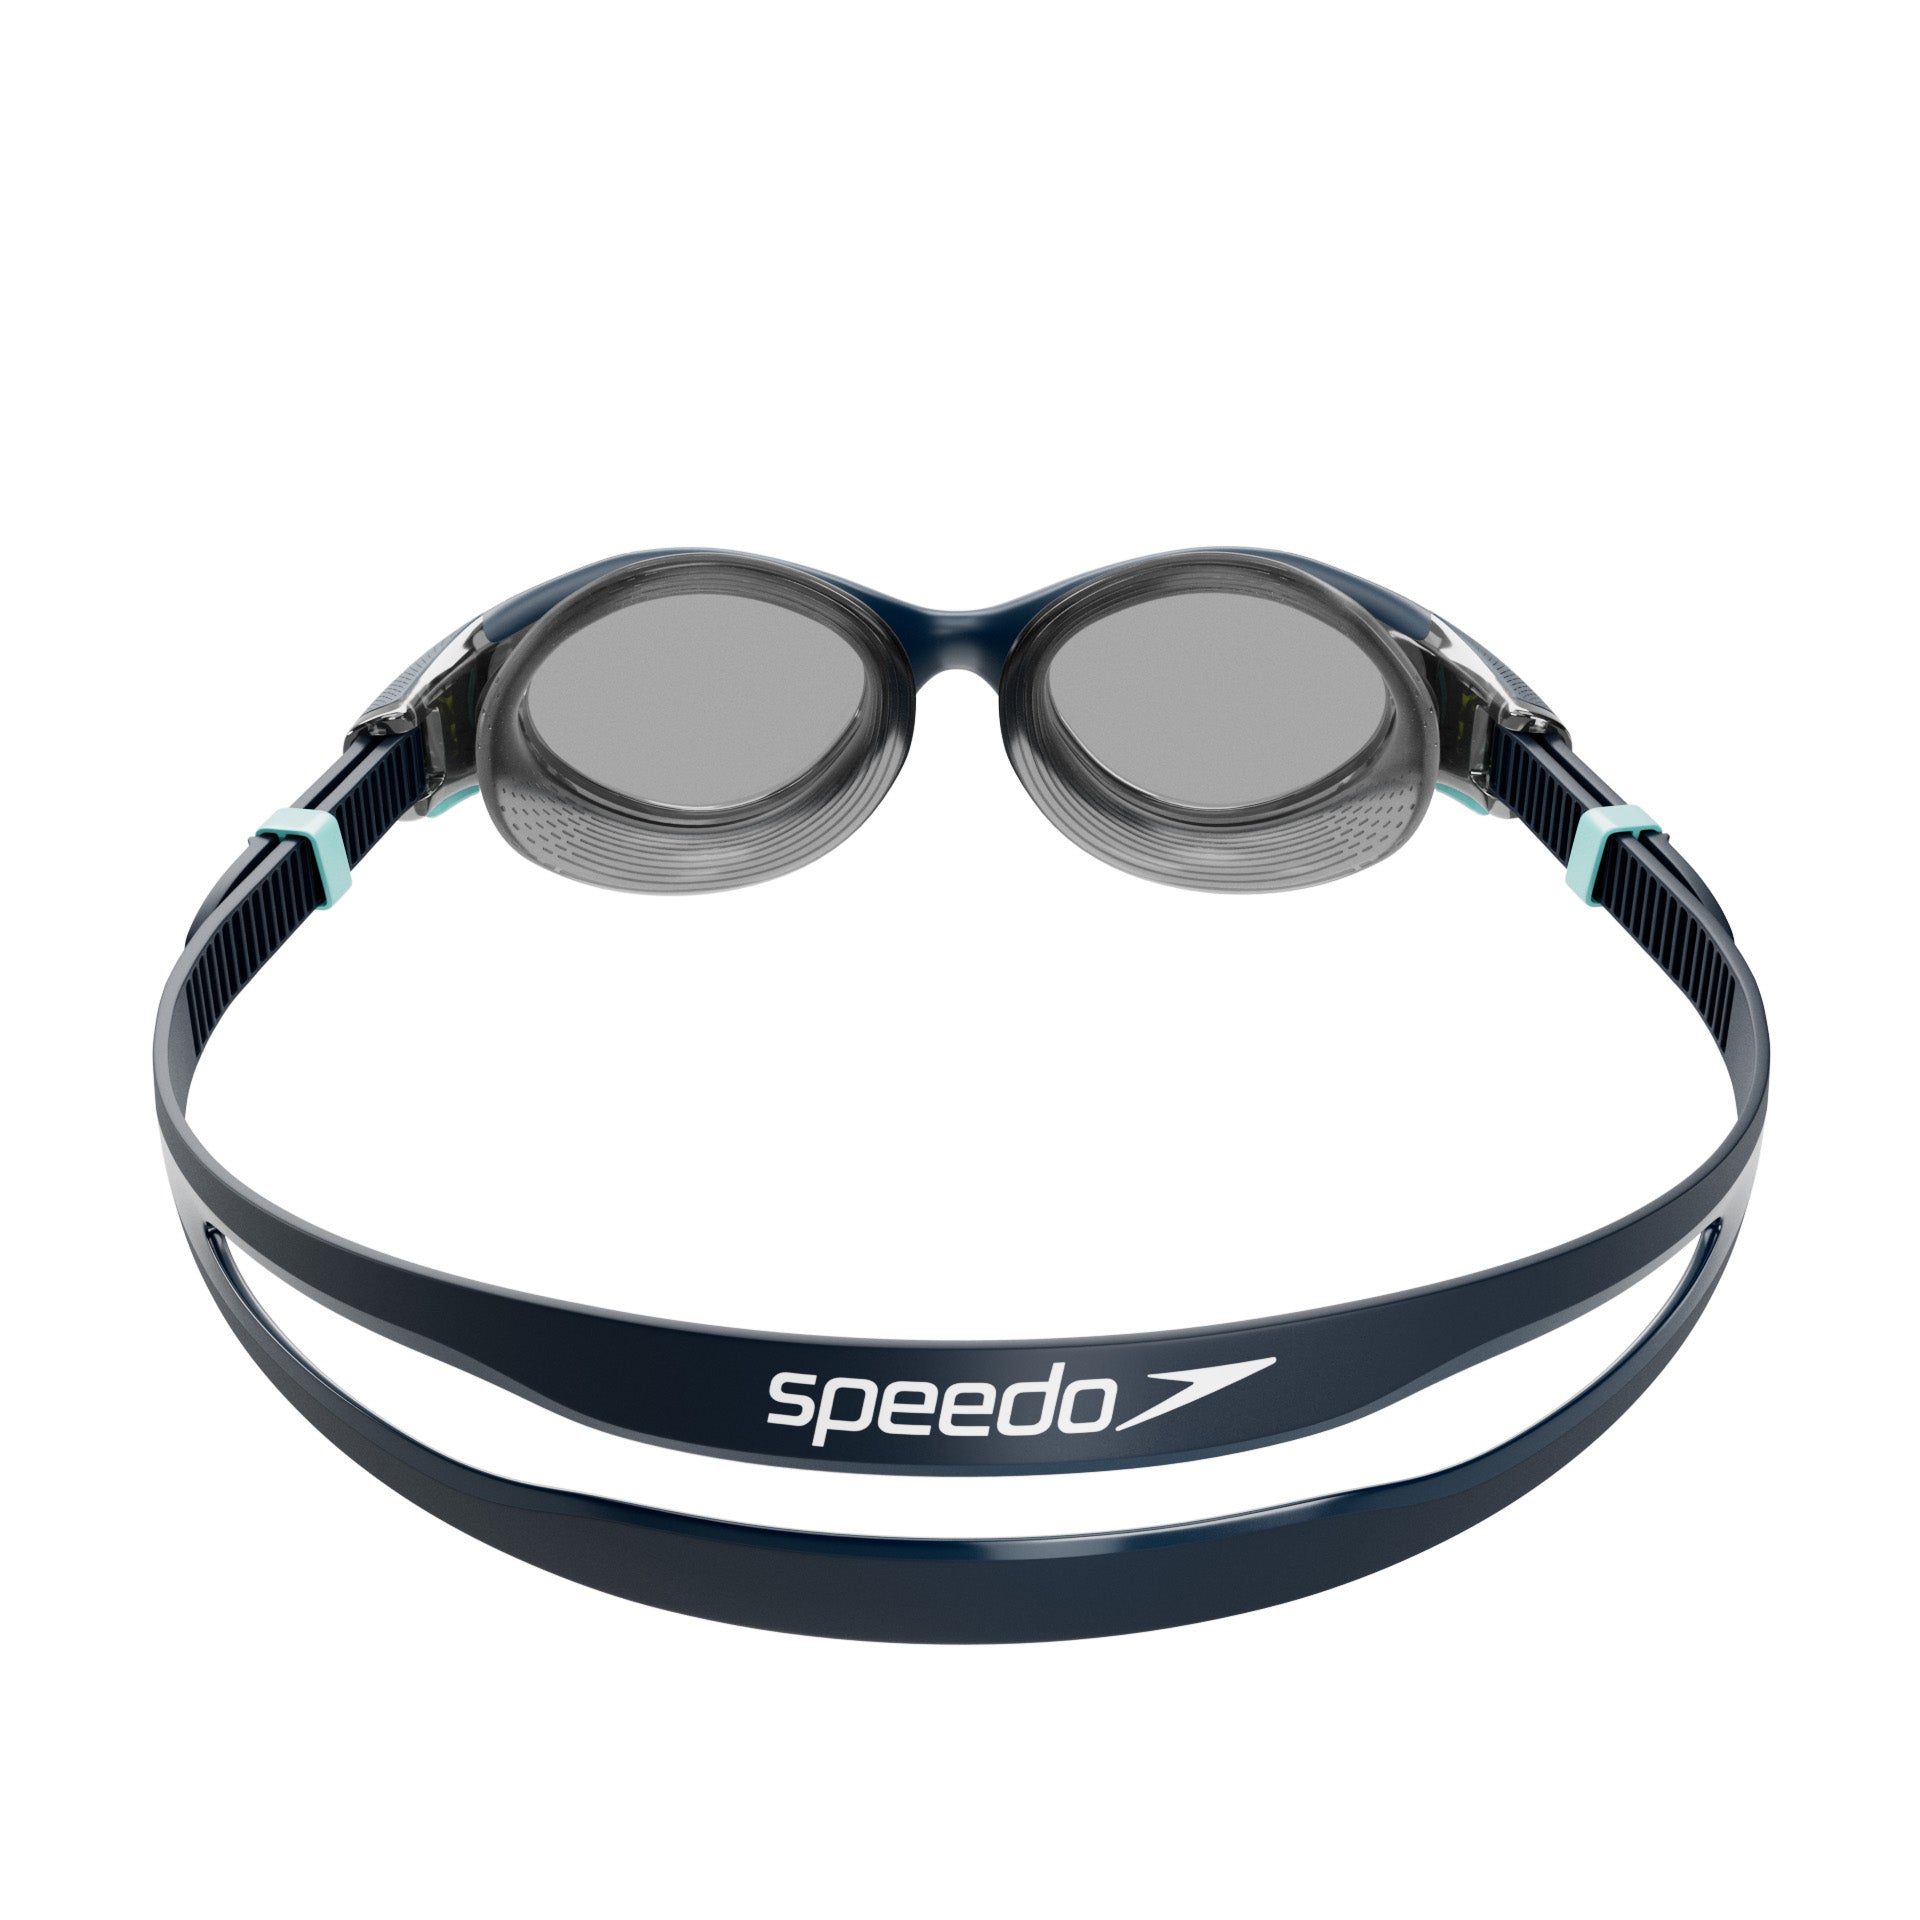 Womens Biofuse 2.0 Swimming Goggles